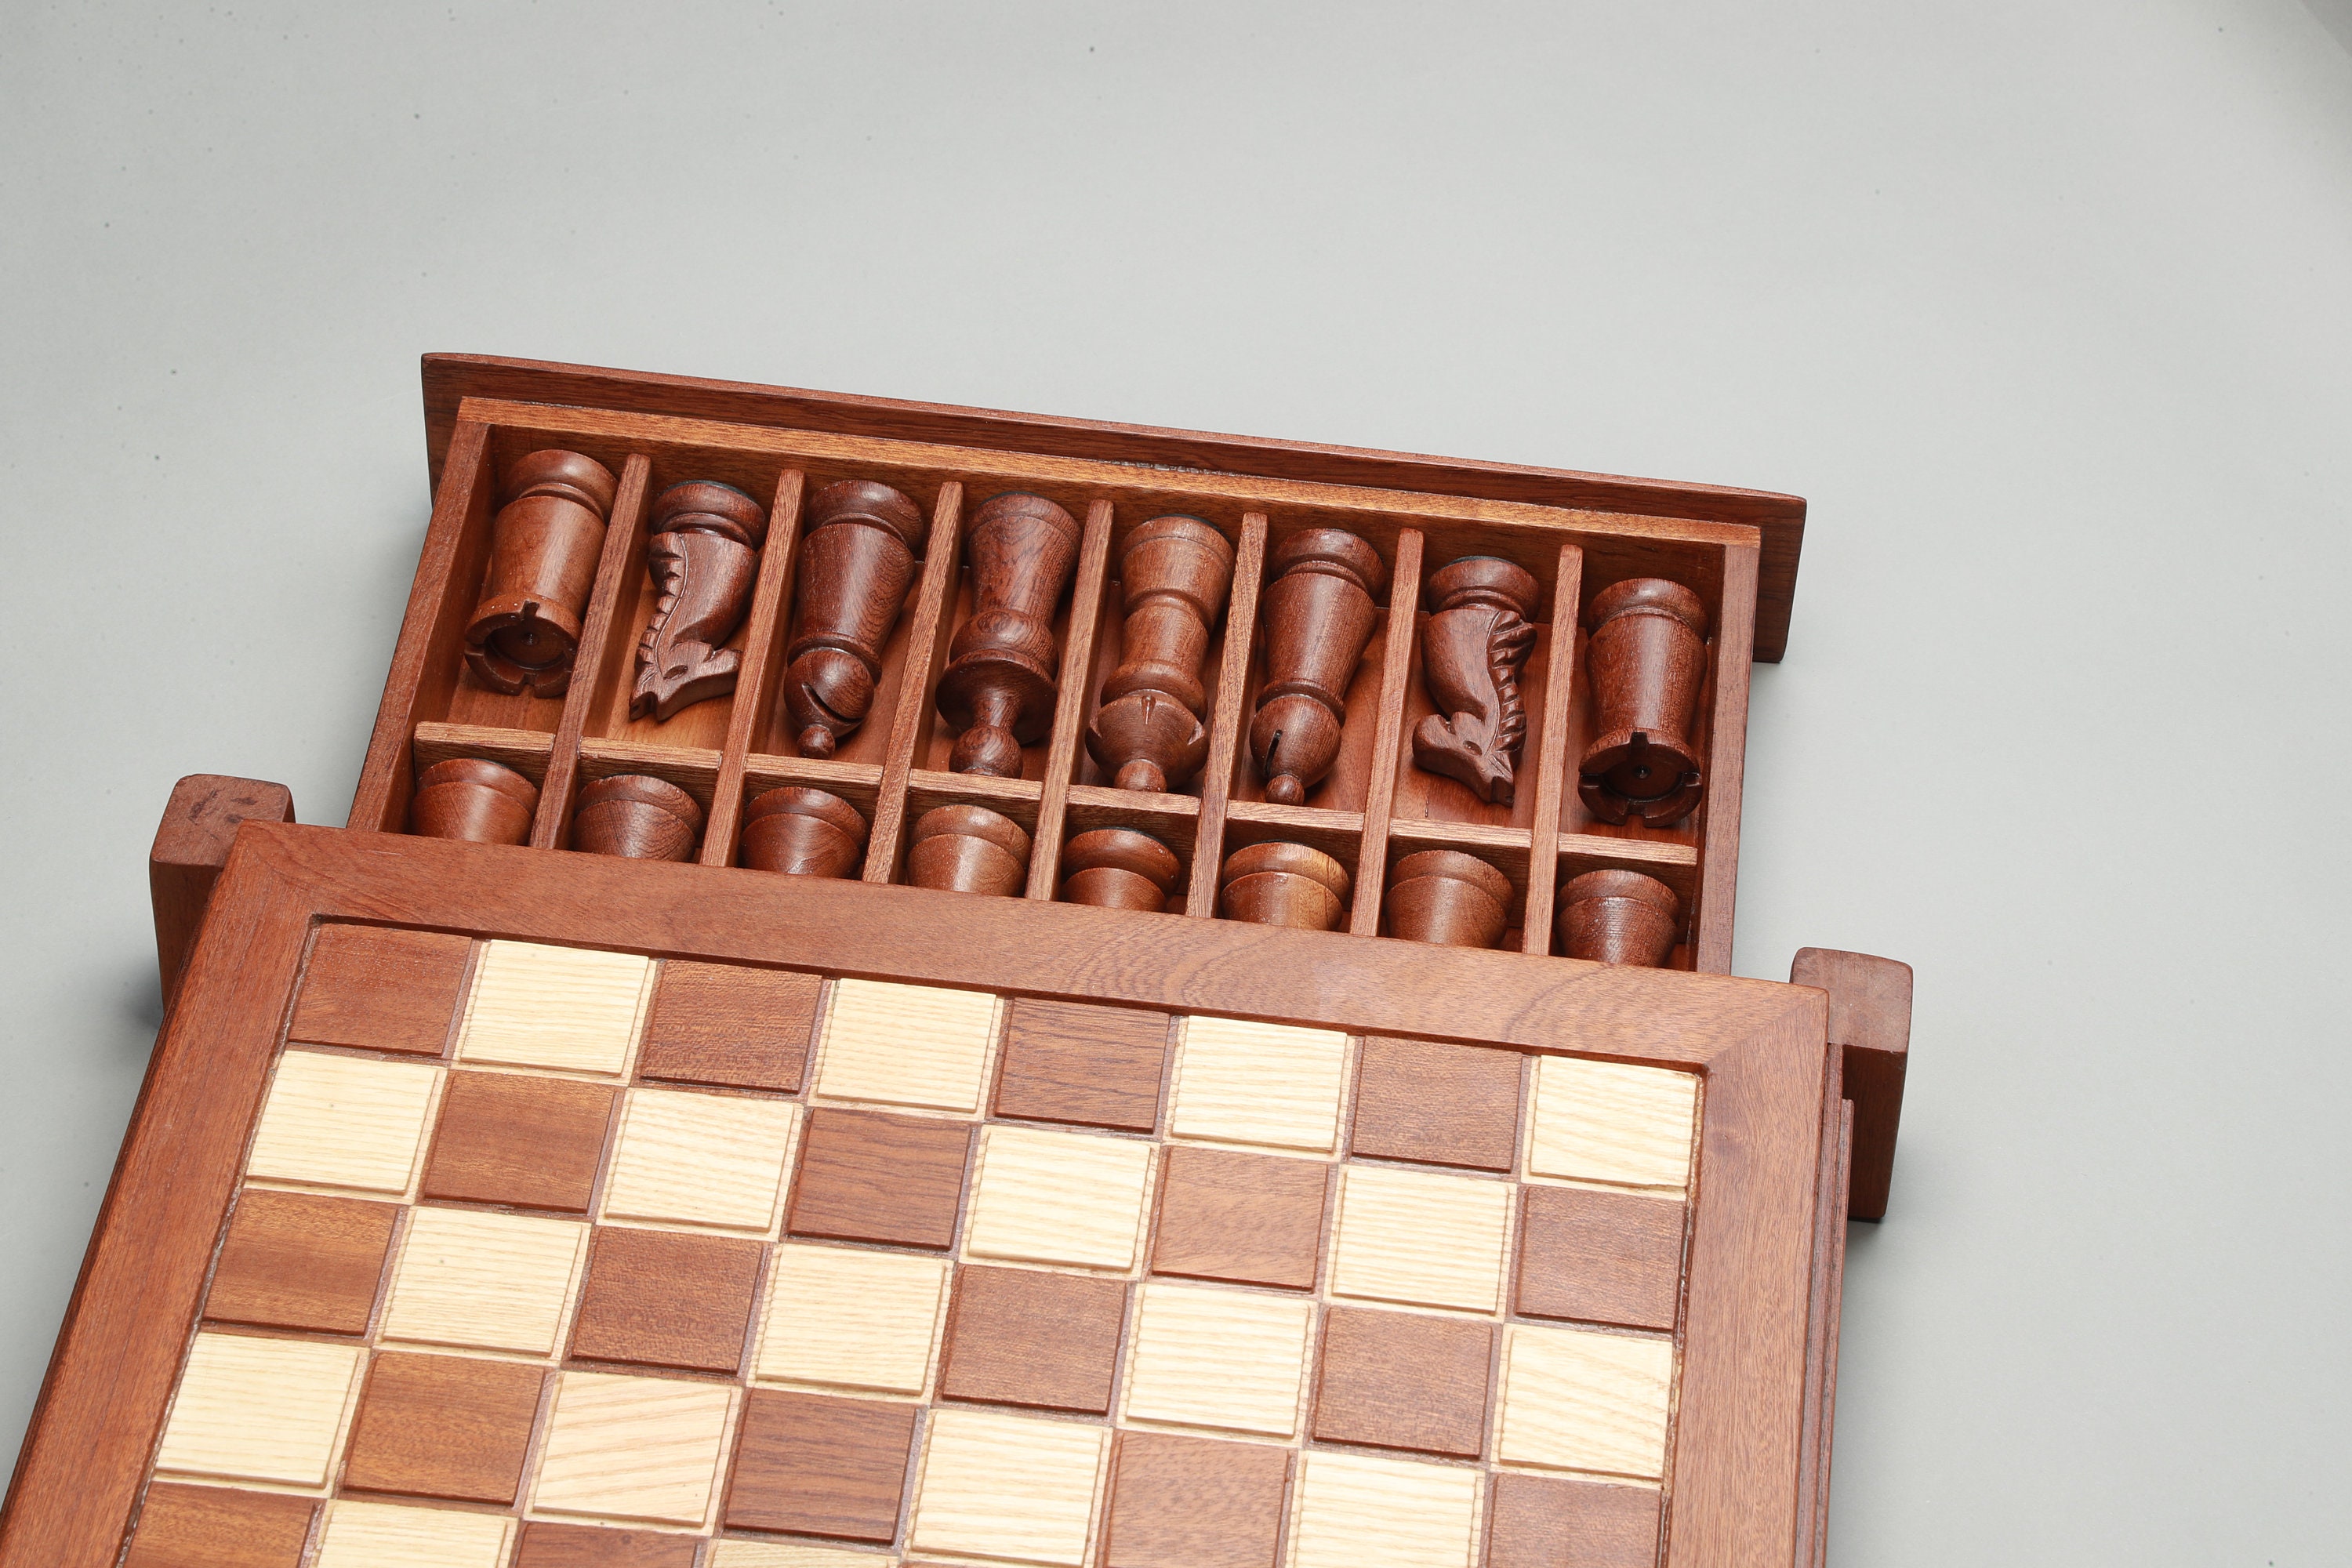 Wooden Professional Luxury Chess Set Folding Large Adults Duel